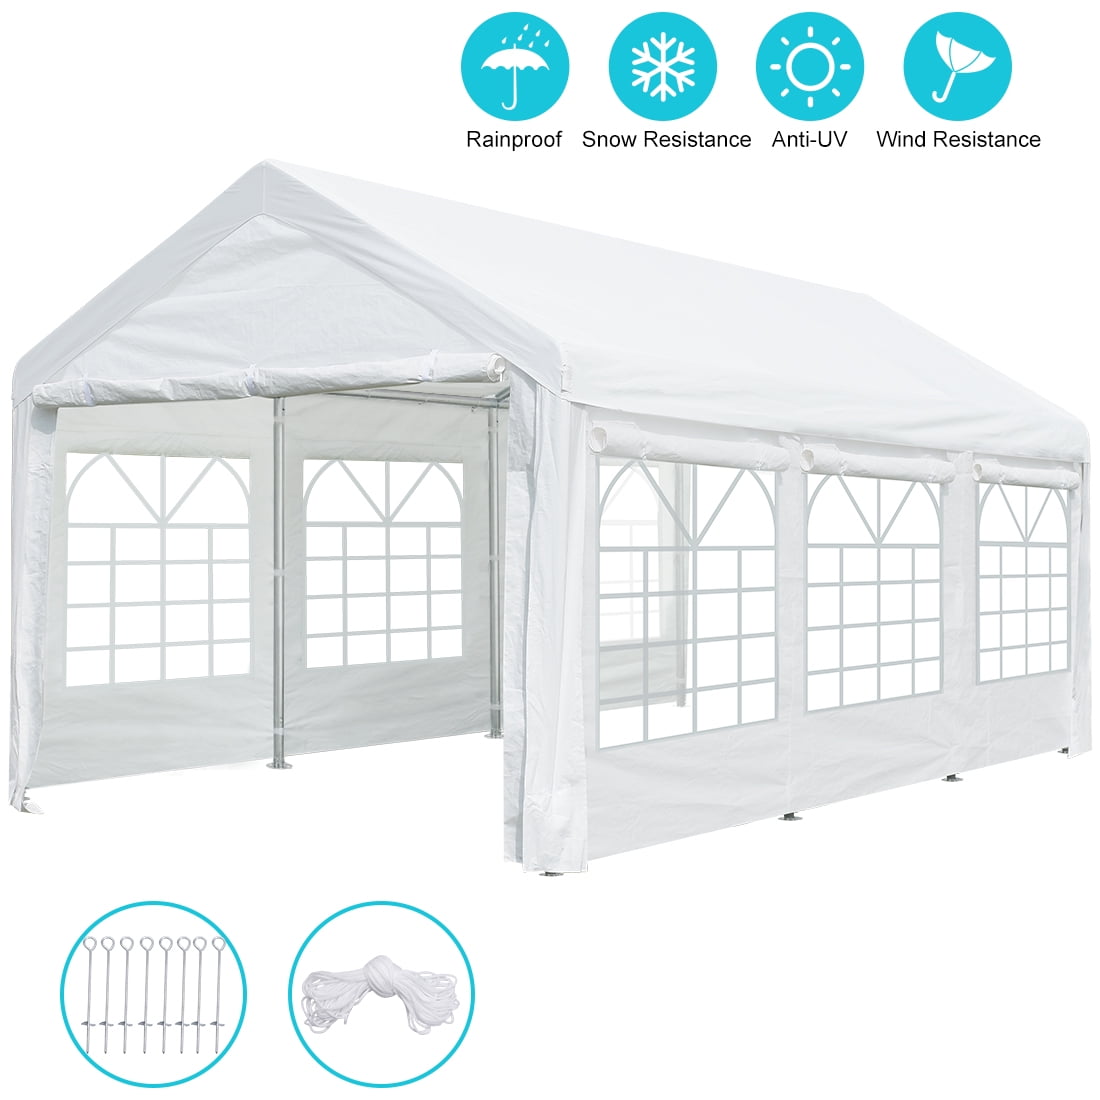 10'X30' White Heavy Duty Portable Garage Carport Car Shelter Outdoor Canopy Tent 